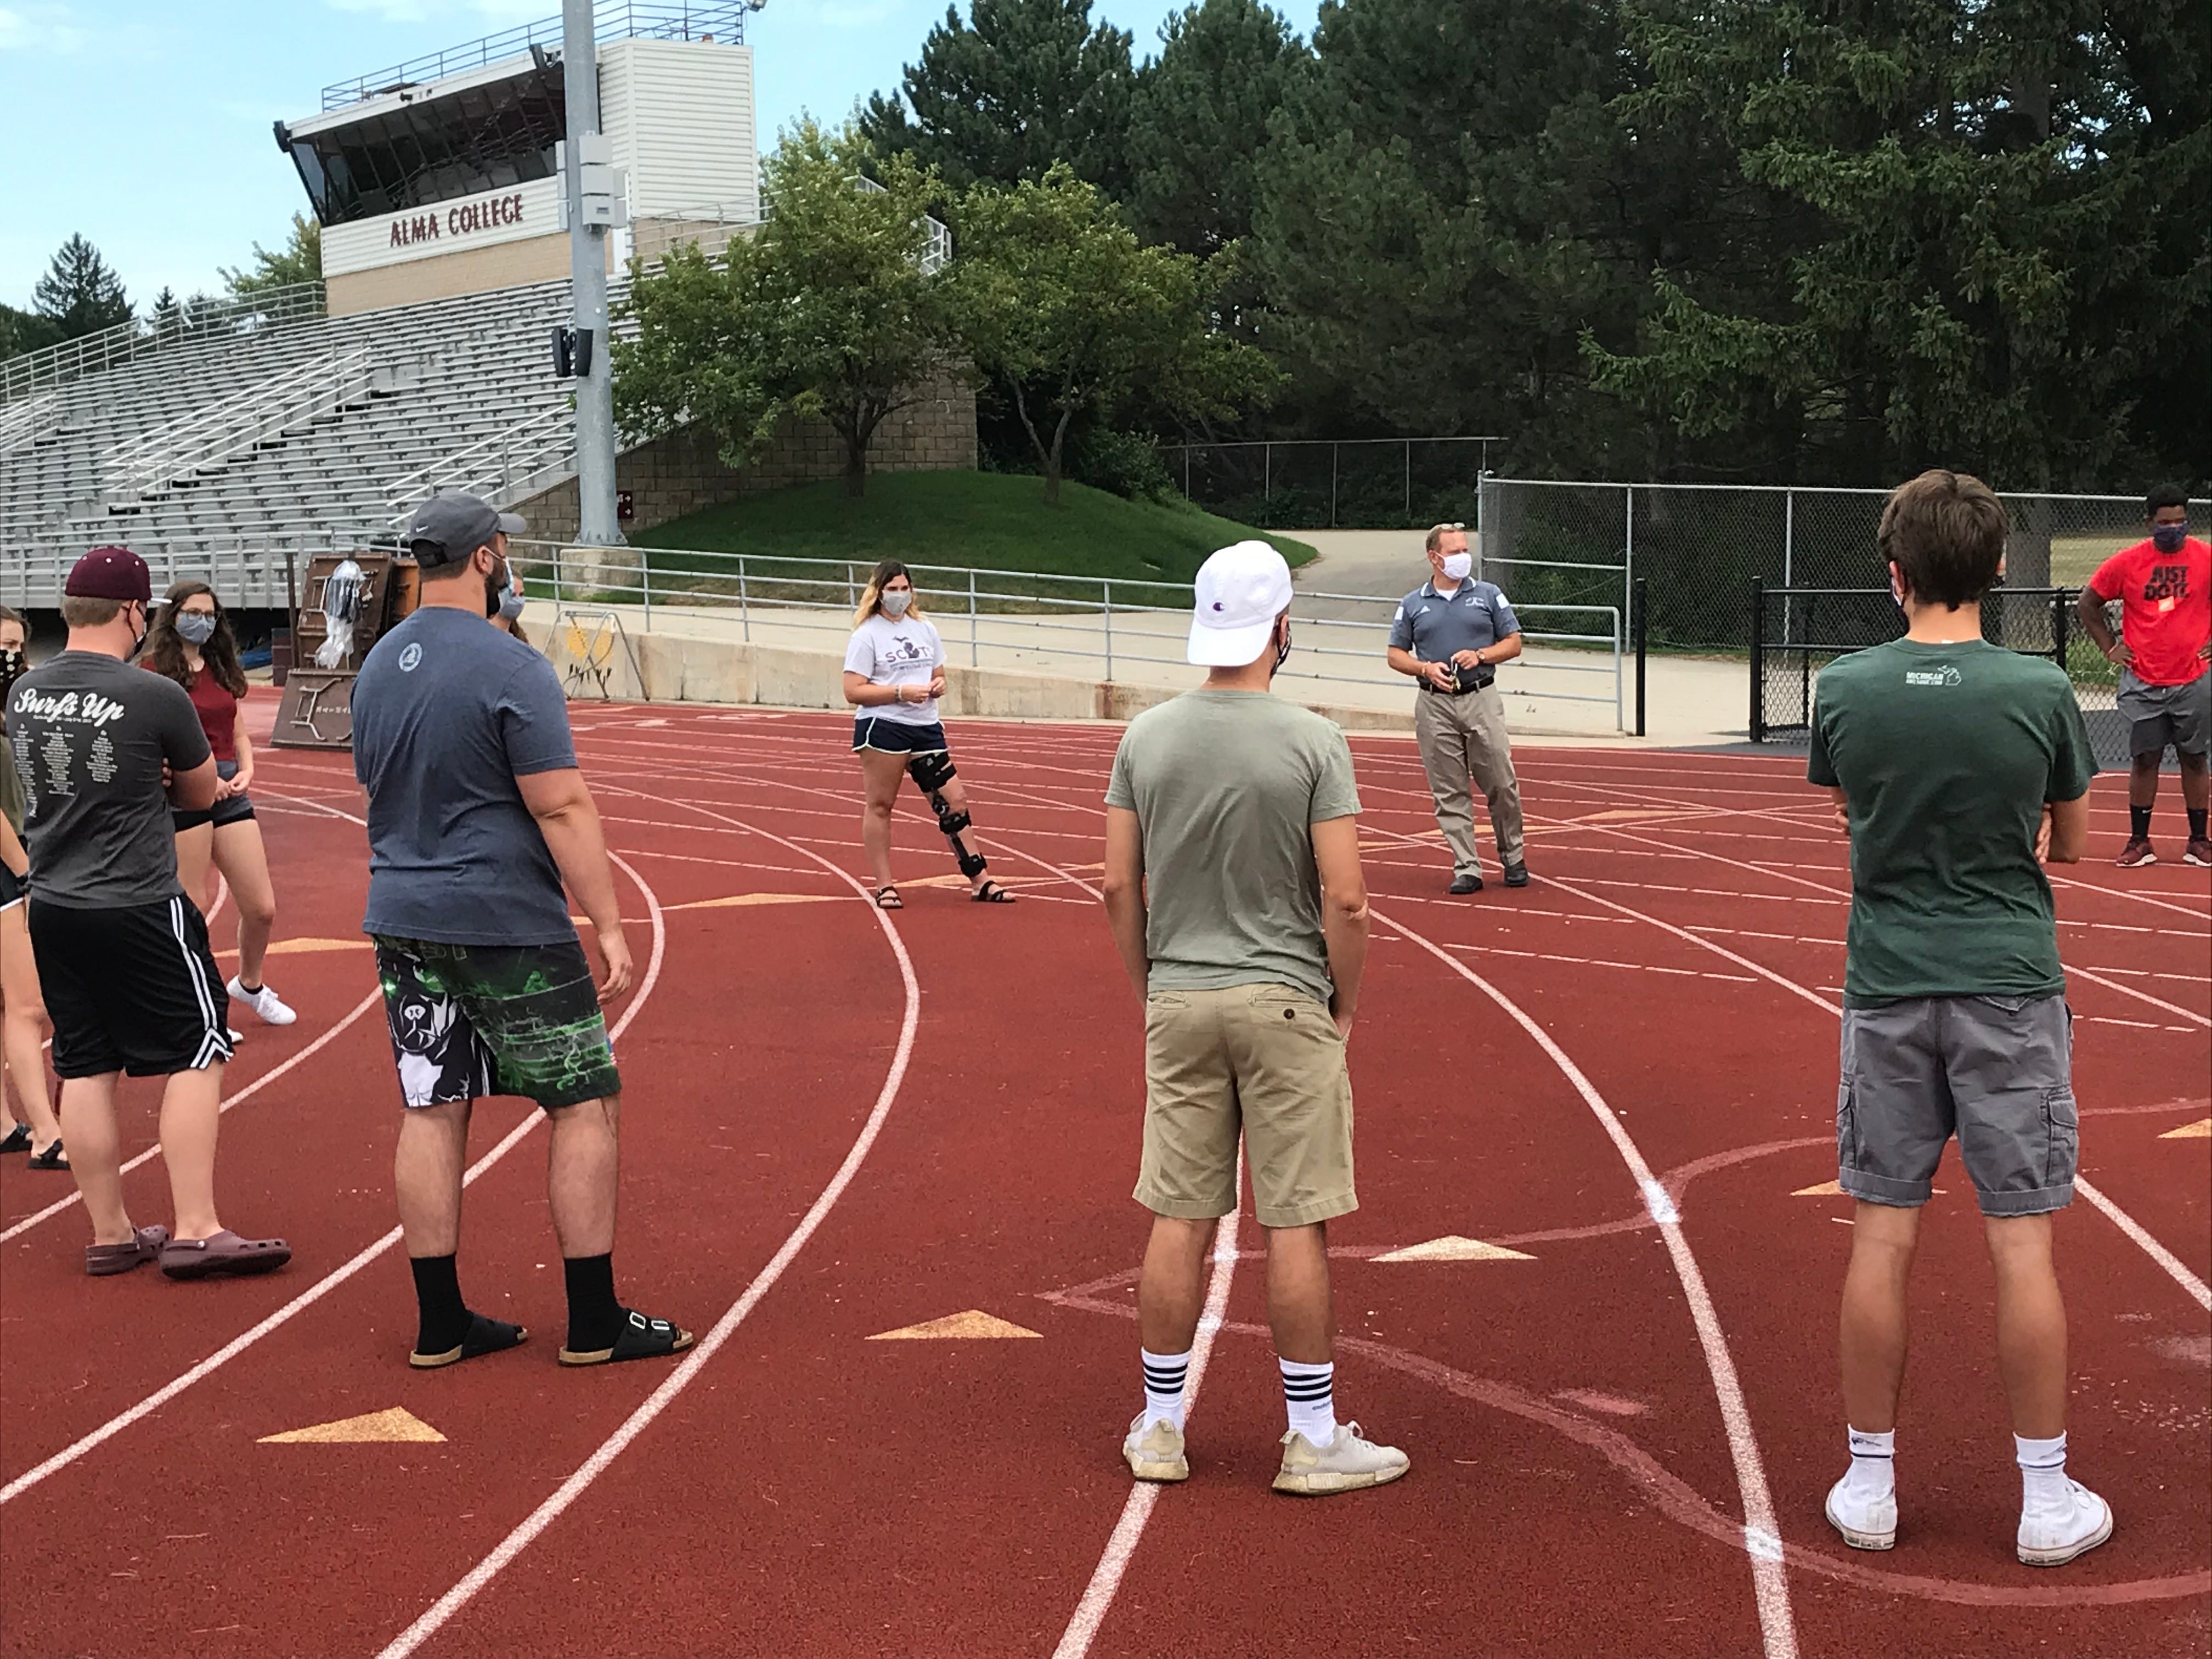 The First Year Seminar class, being taught by Phillip Andre escaped a hot classroom and moved outside to the track surrounding the school's football field.